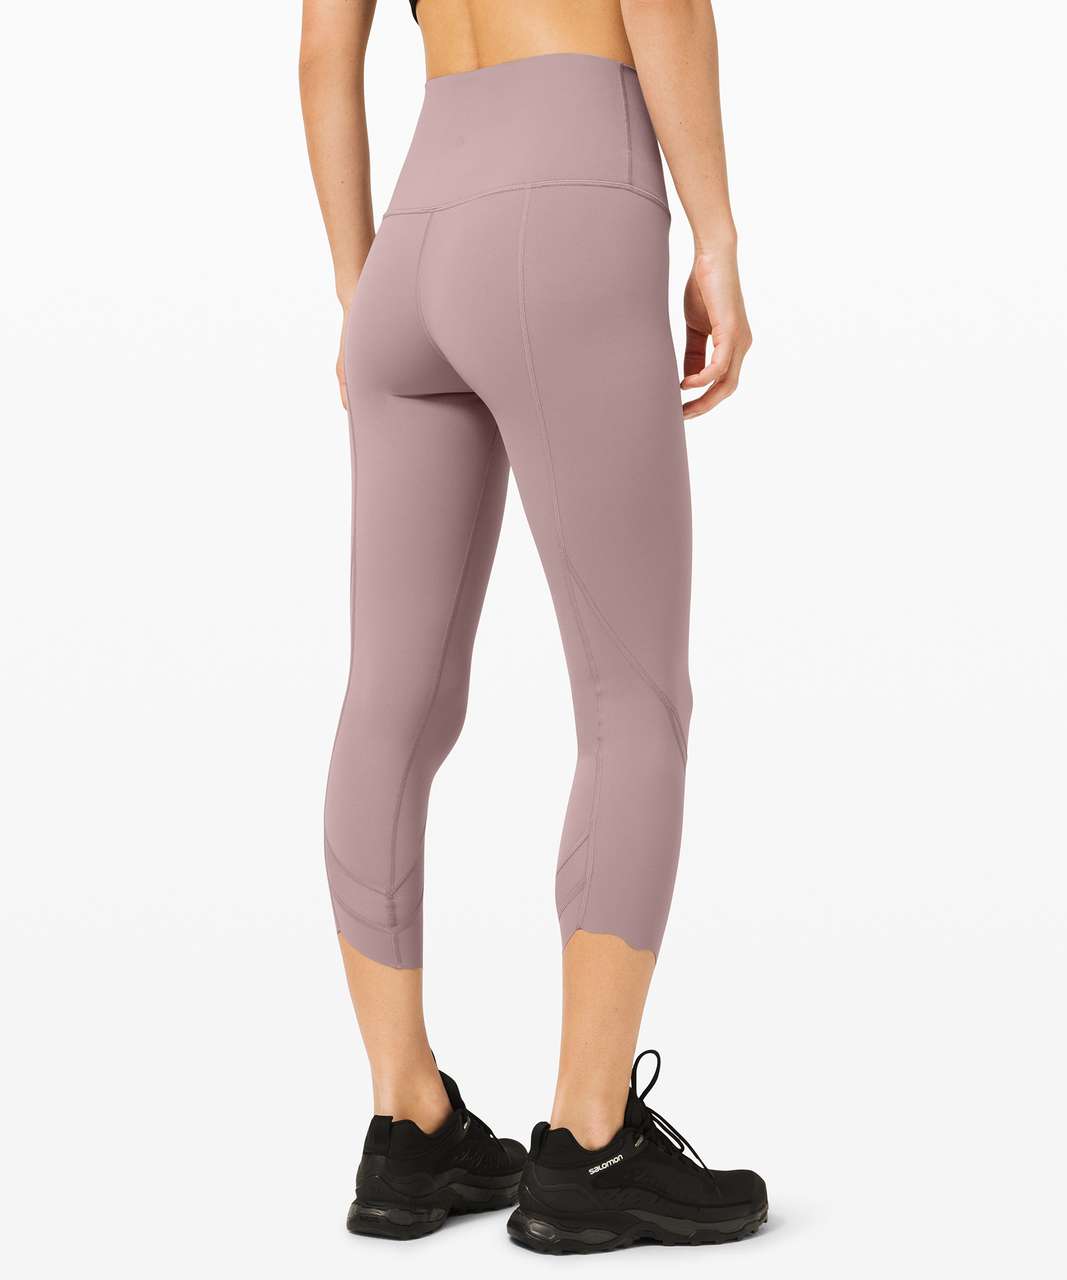 Do Wunder-Under Luxtreme High Rise Crop 23 Ankle Gap? Any issues with  slipping? : r/lululemon